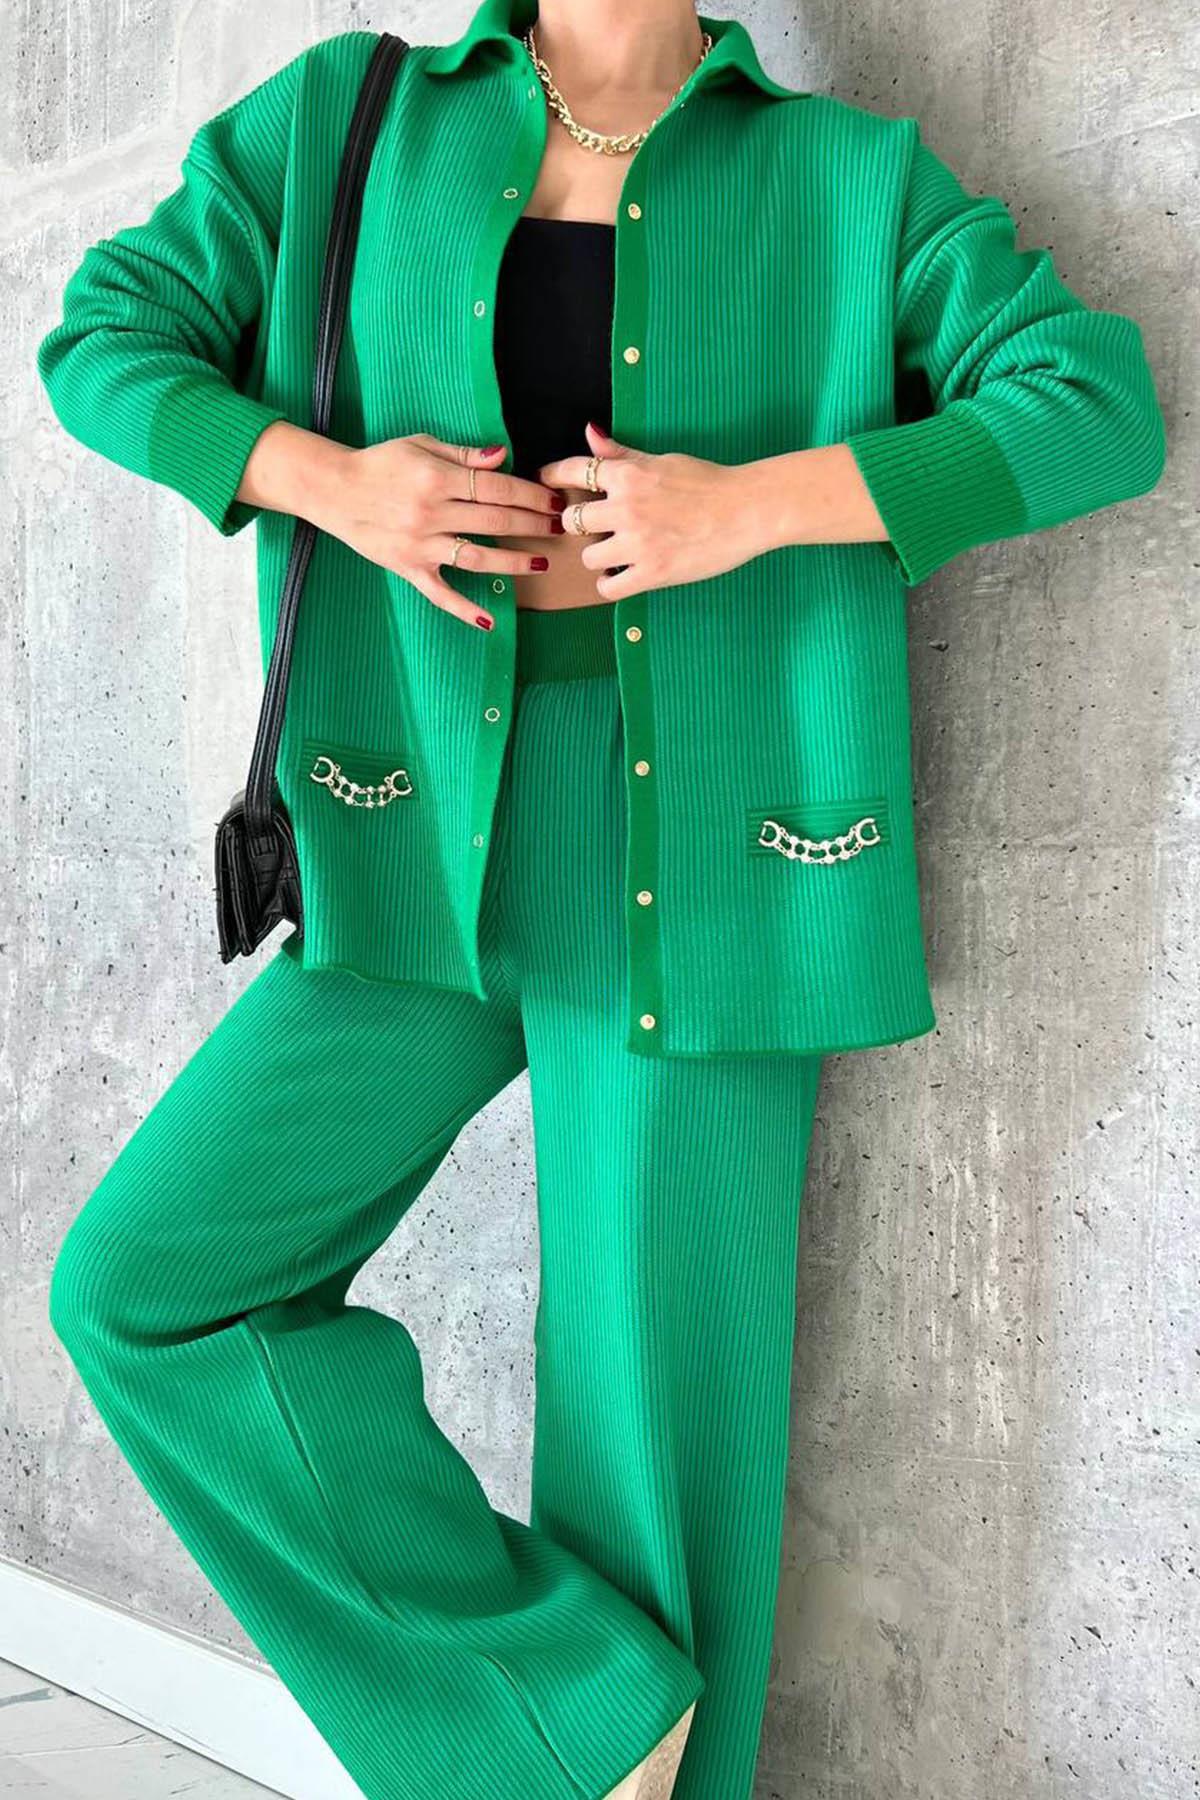 A wholesale clothing model wears Milan Cardigan Low-cut Suit - Benetton Green, Turkish wholesale Suit of Qustyle